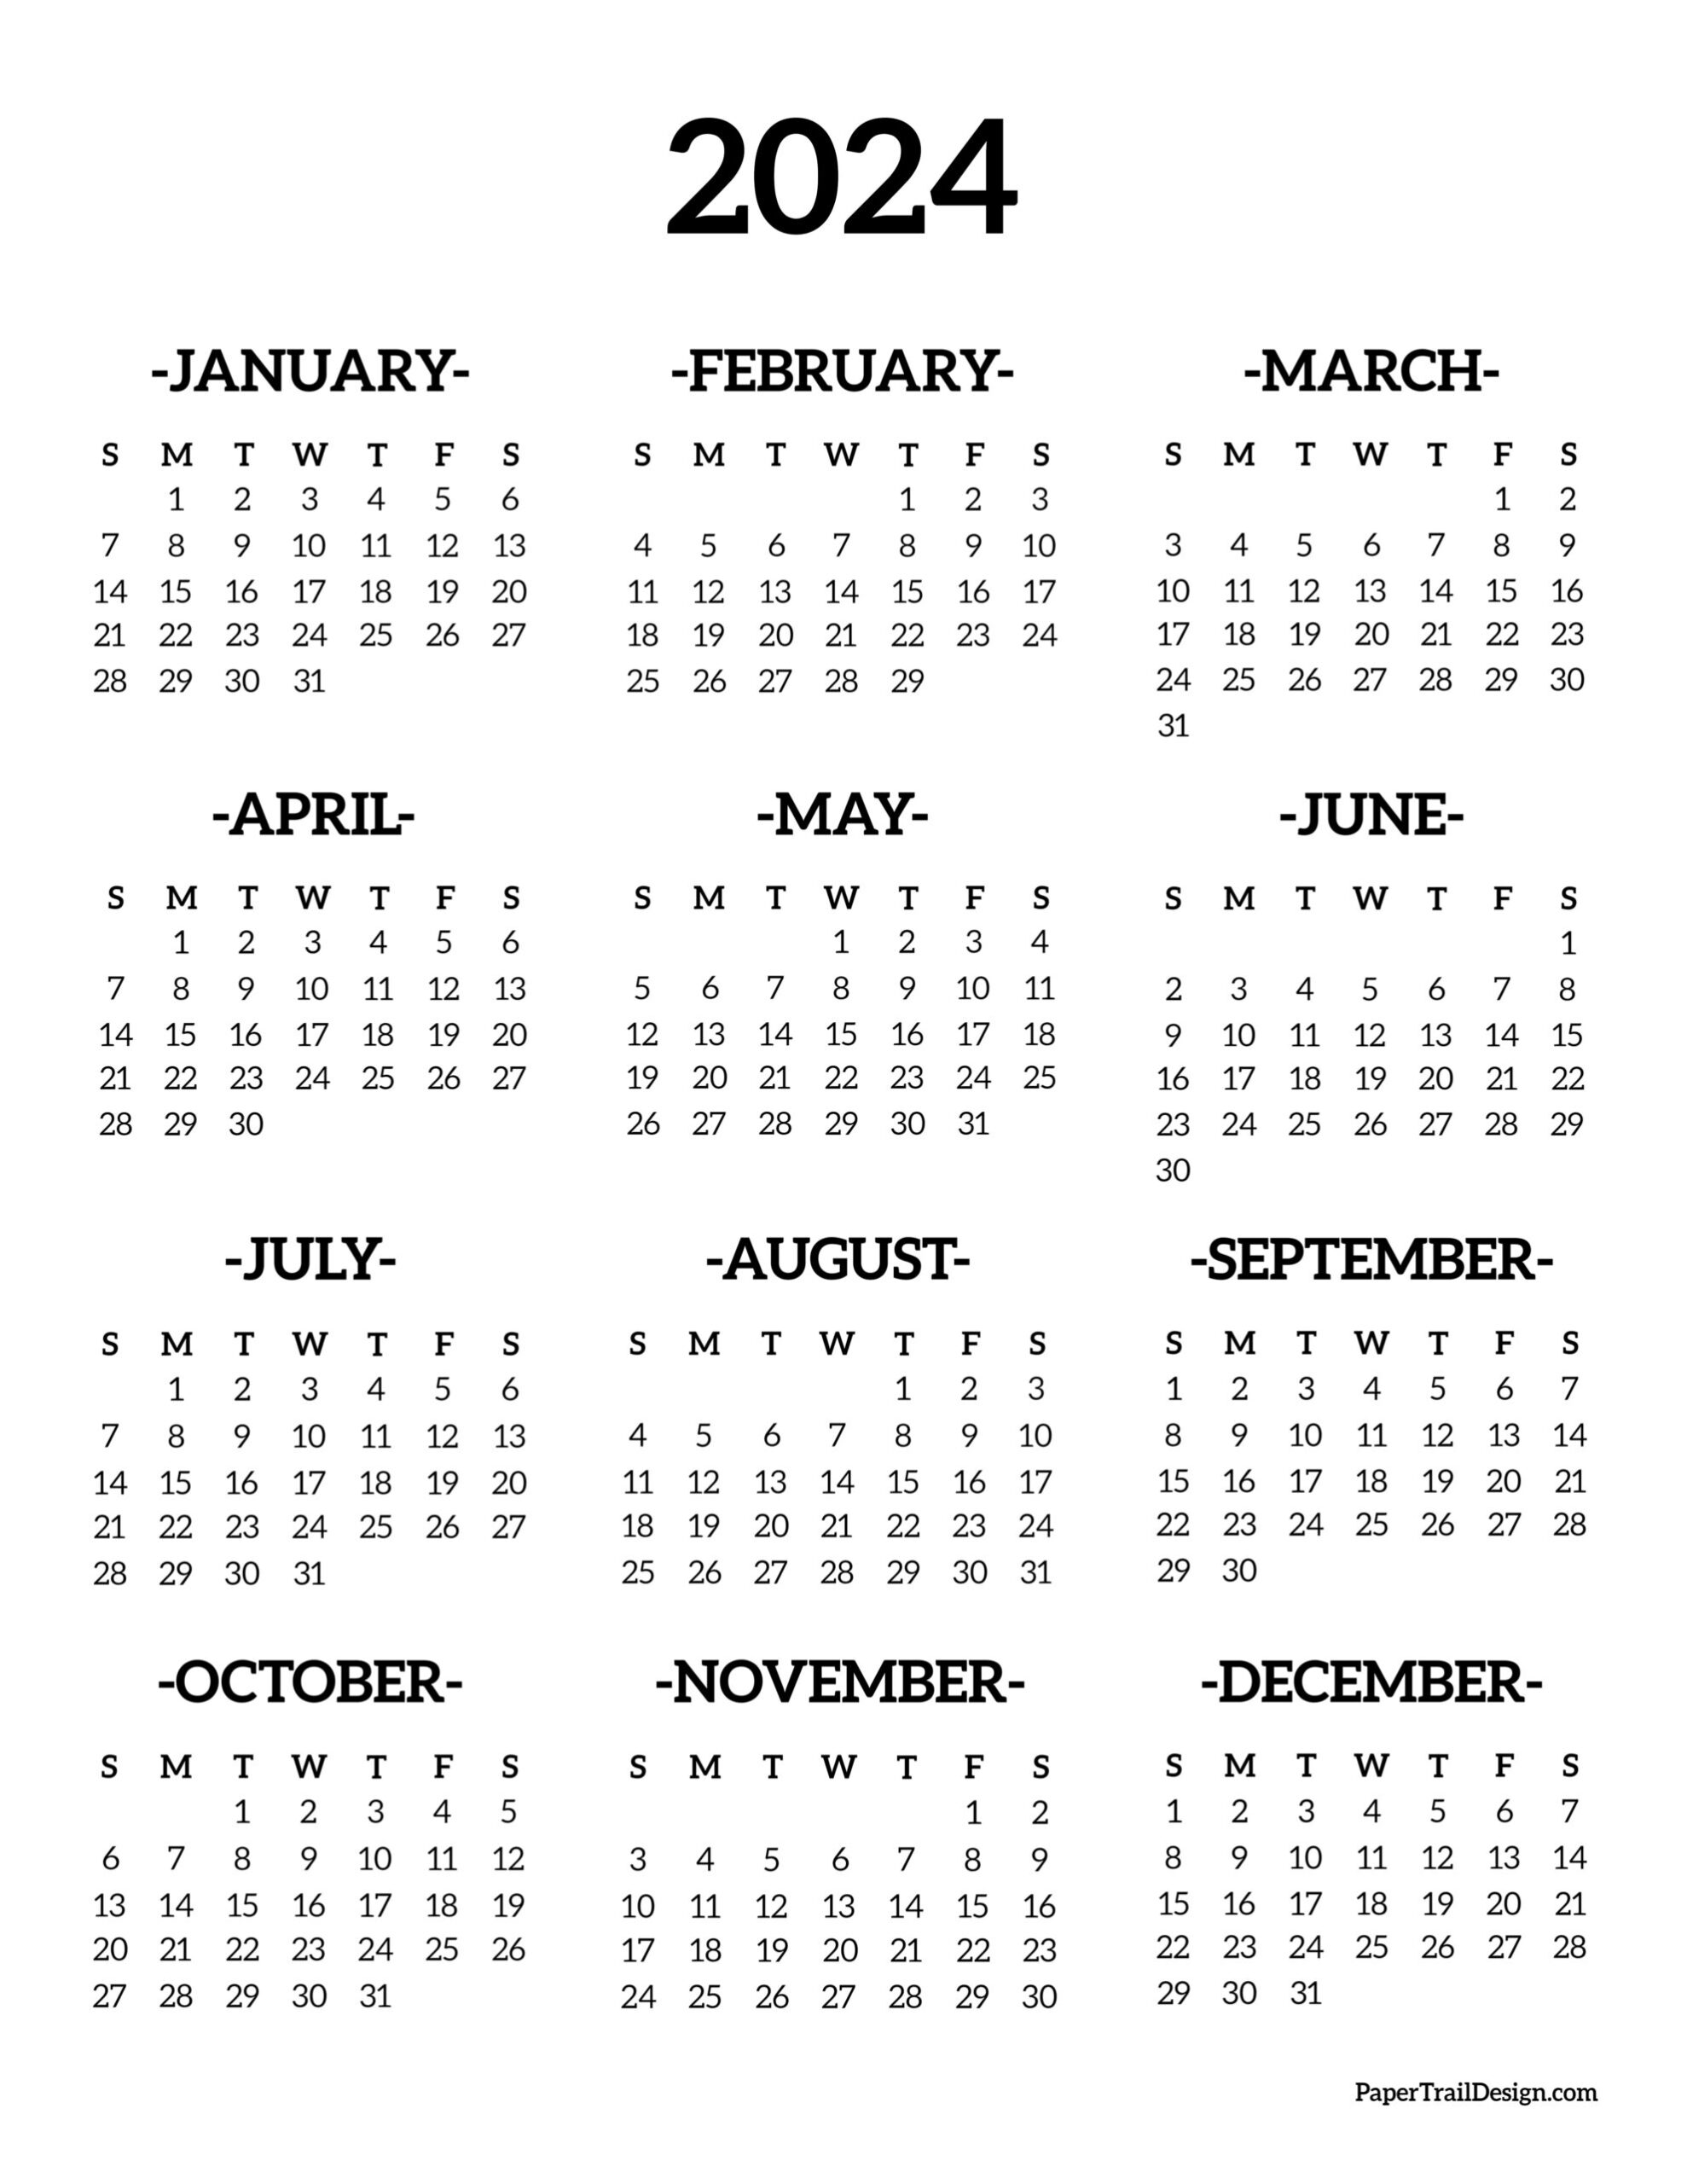 Calendar 2024 Printable One Page - Paper Trail Design for Free Printable 2024 Yearly Calendar Printable